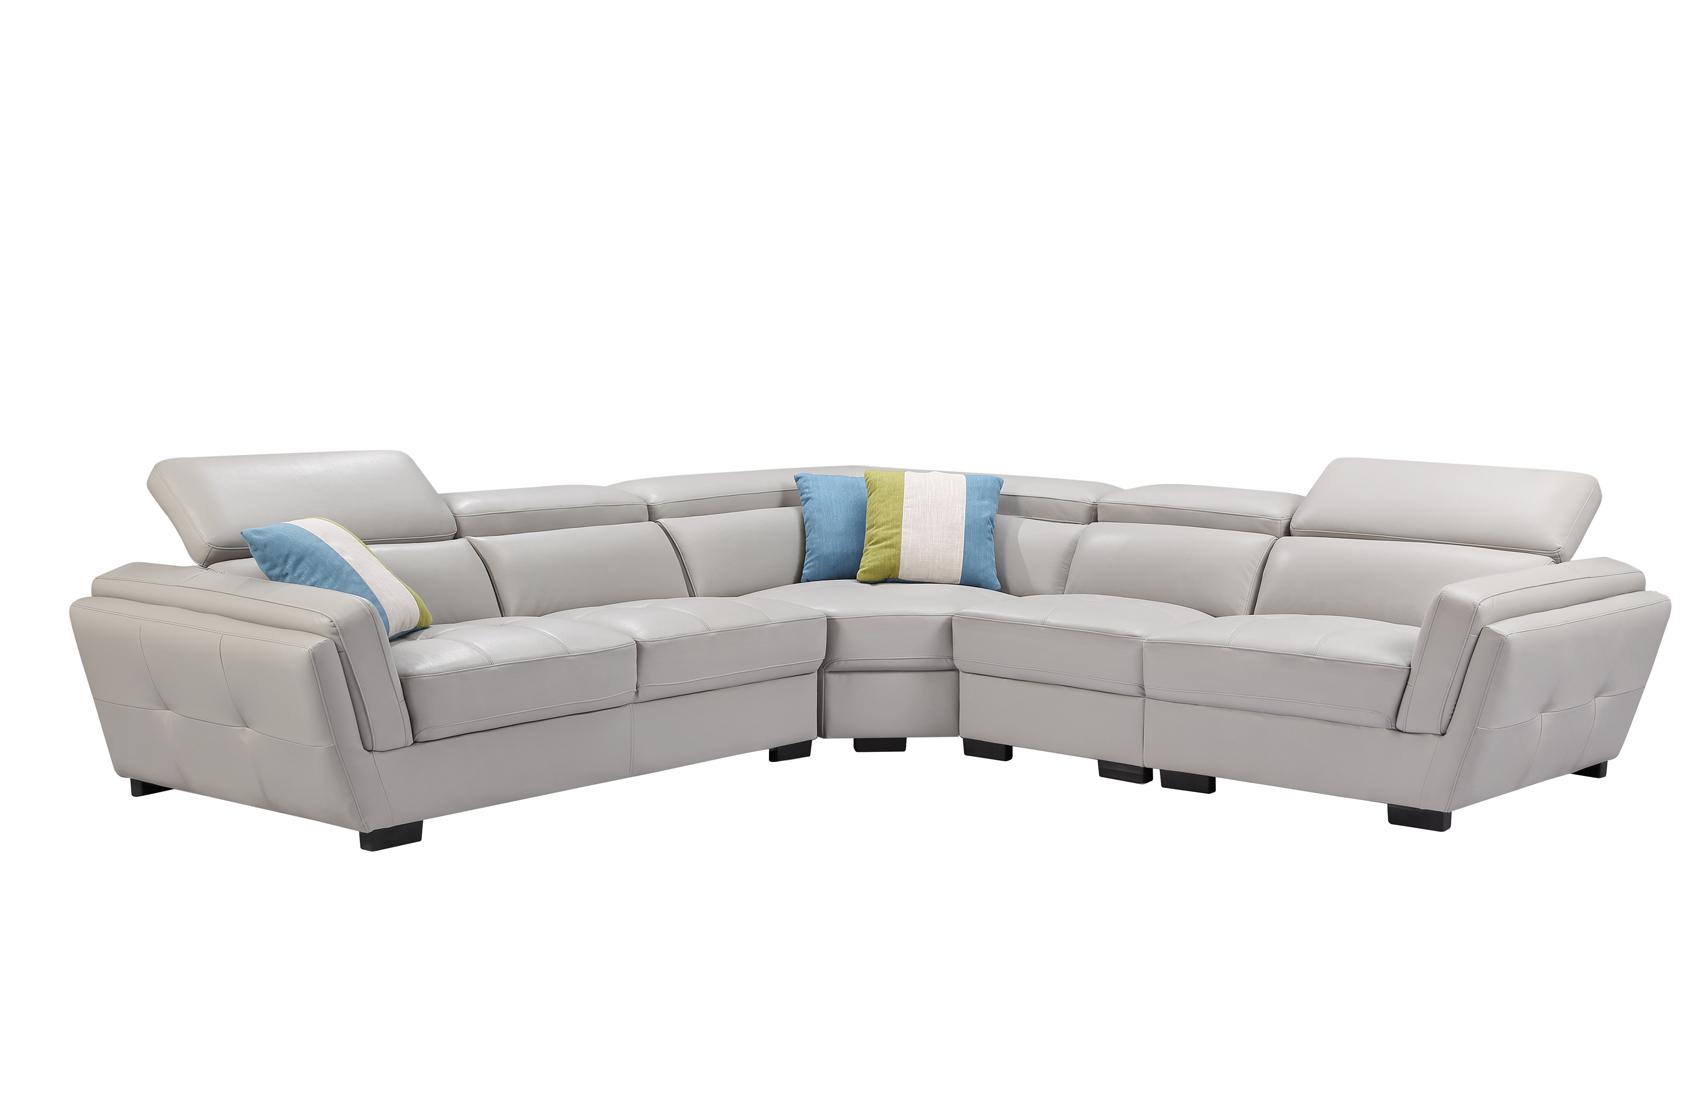 Contemporary, Modern Sectional Sofa 2566 2566SECTIONAL in Light Gray Top grain leather